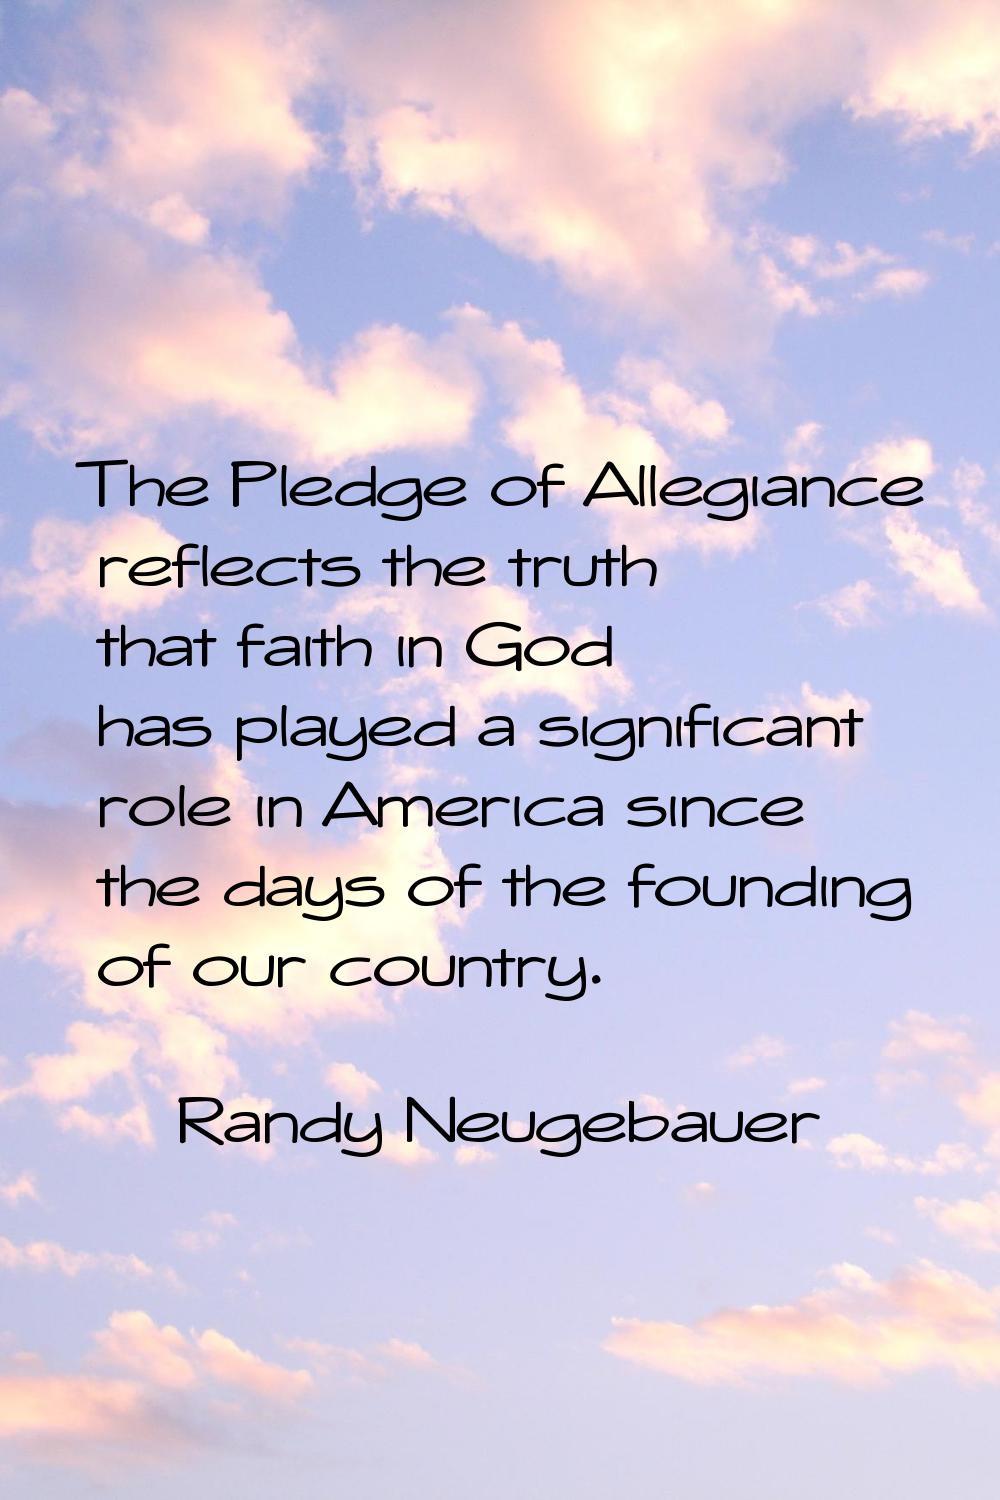 The Pledge of Allegiance reflects the truth that faith in God has played a significant role in Amer